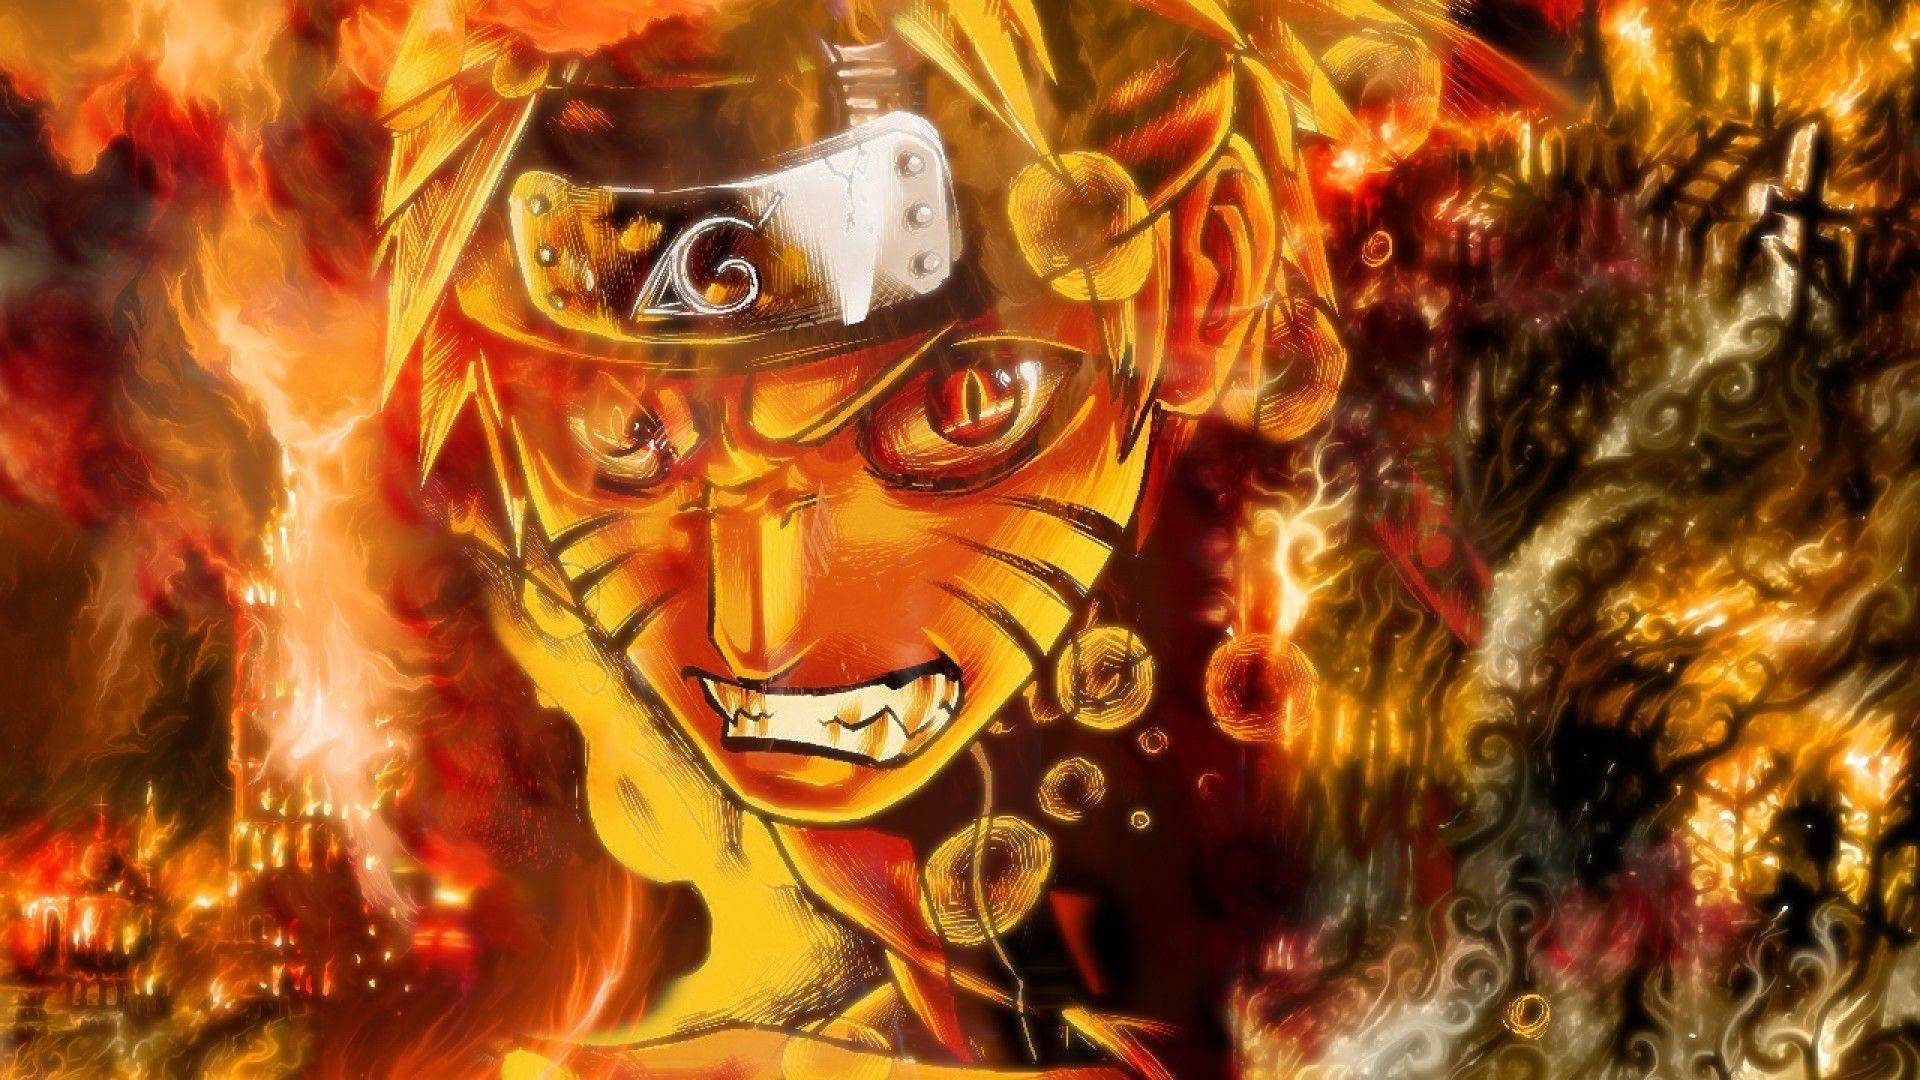 1920x1080 Cool Naruto Shippuden Wallpapers - Wallpaper Cave